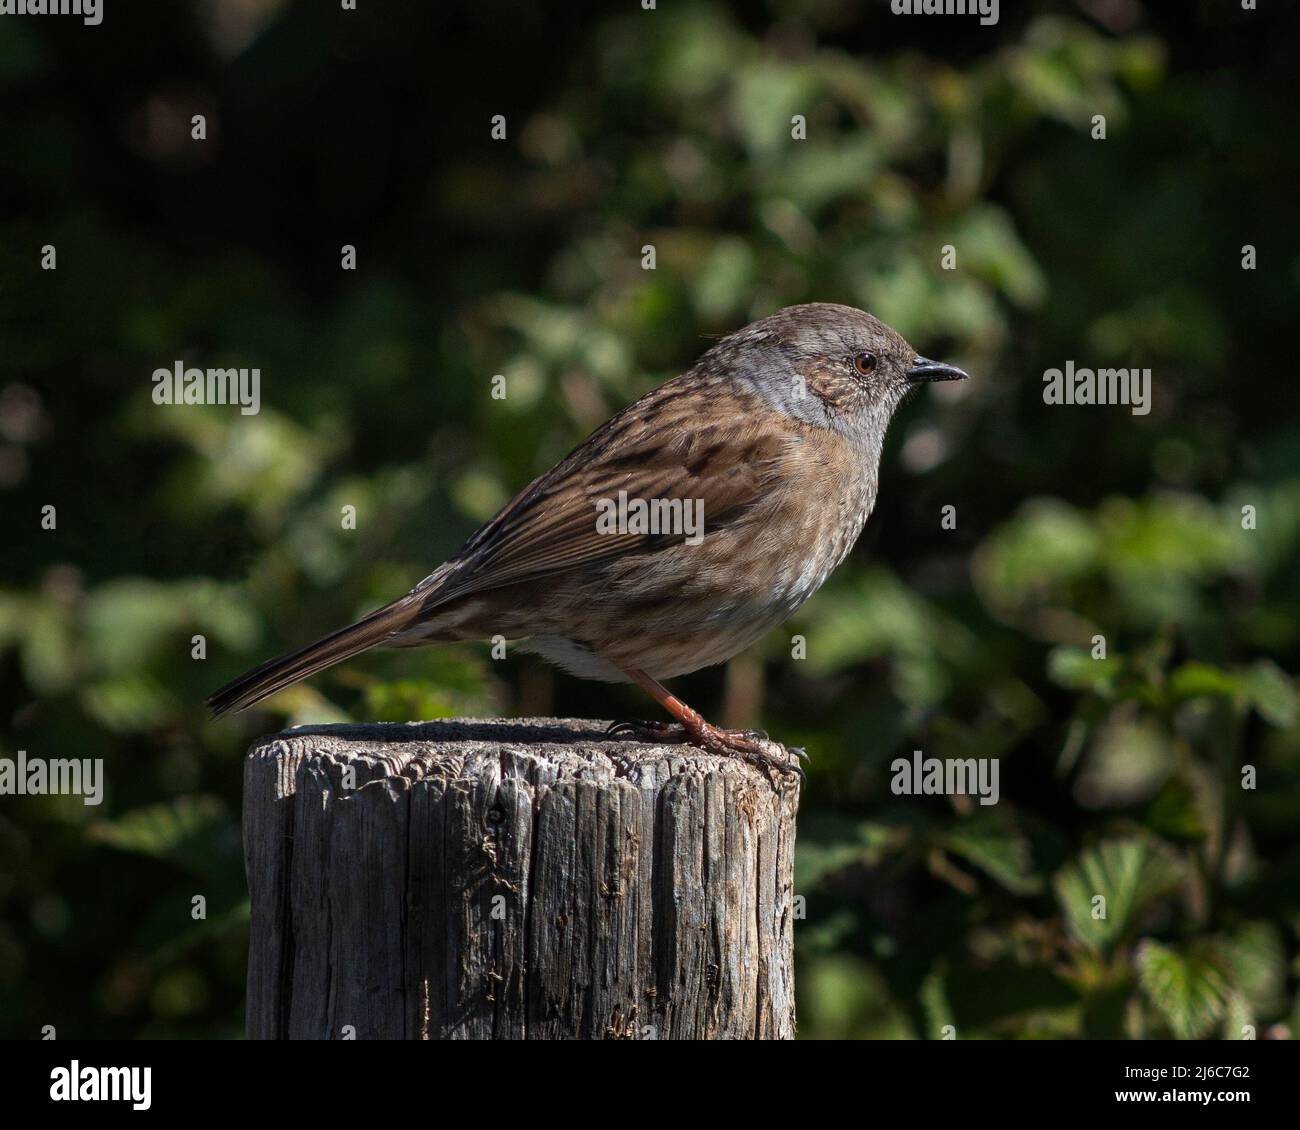 Dunnock bird perched on a wooden post, West Sussex, UK Stock Photo